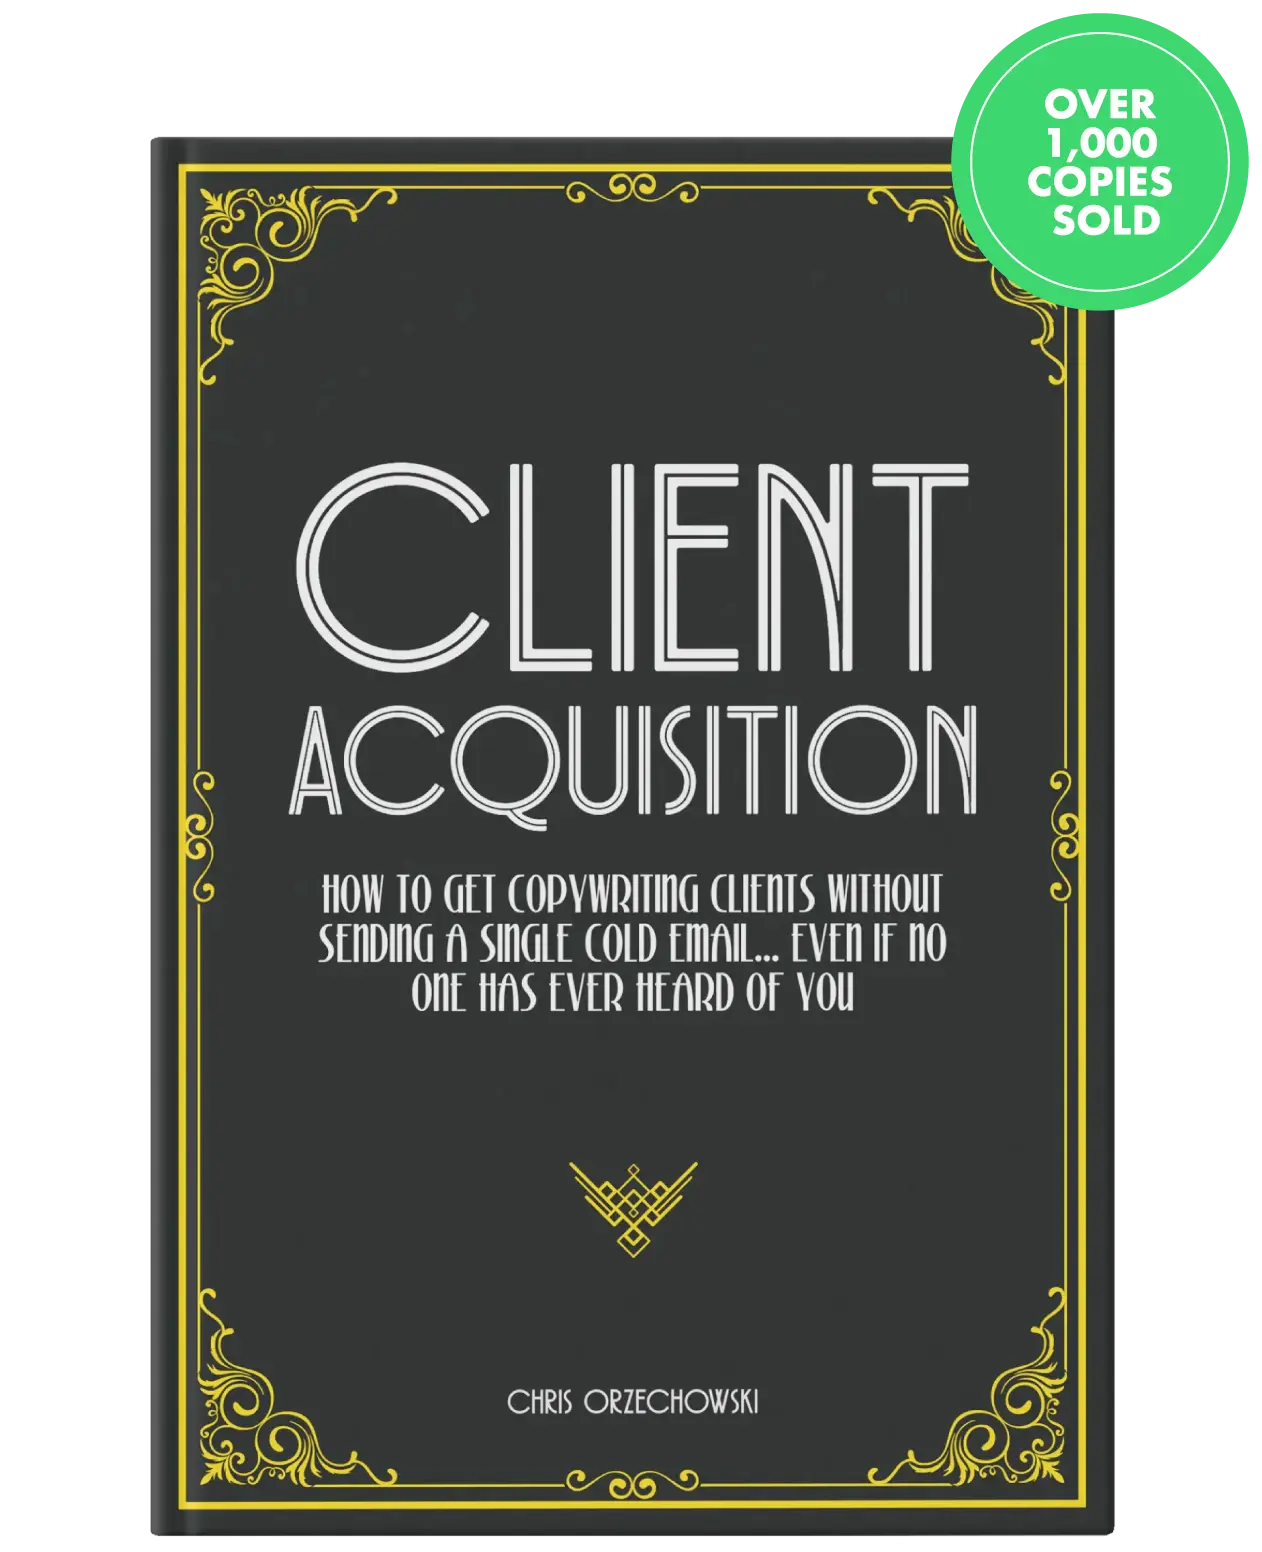 Chris has sold over 1,000 copies of his book “Client Acquisition”